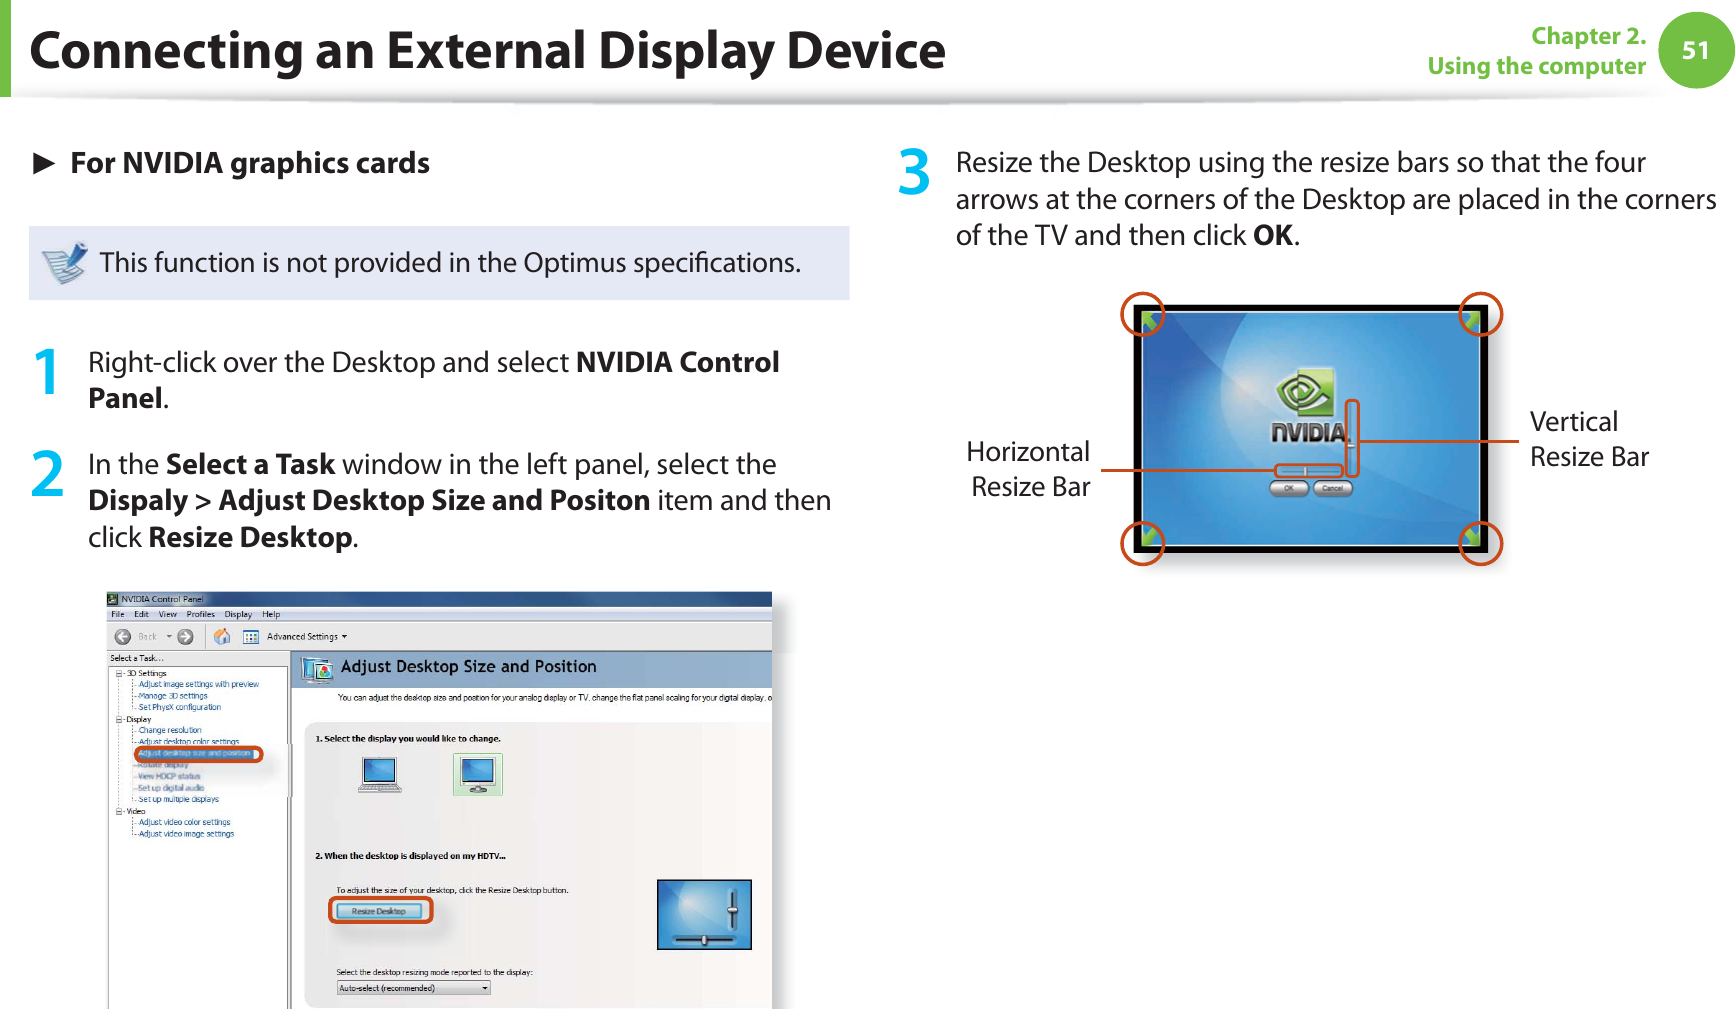 51Chapter 2. Using the computerConnecting an External Display Device► For NVIDIA graphics cardsThis function is not provided in the Optimus speciﬁ cations.1  Right-click over the Desktop and select NVIDIA Control Panel.2 In the Select a Task window in the left panel, select the Dispaly &gt; Adjust Desktop Size and Positon item and then click Resize Desktop.3  Resize the Desktop using the resize bars so that the four arrows at the corners of the Desktop are placed in the corners of the TV and then click OK.Horizontal Resize BarVertical Resize Bar